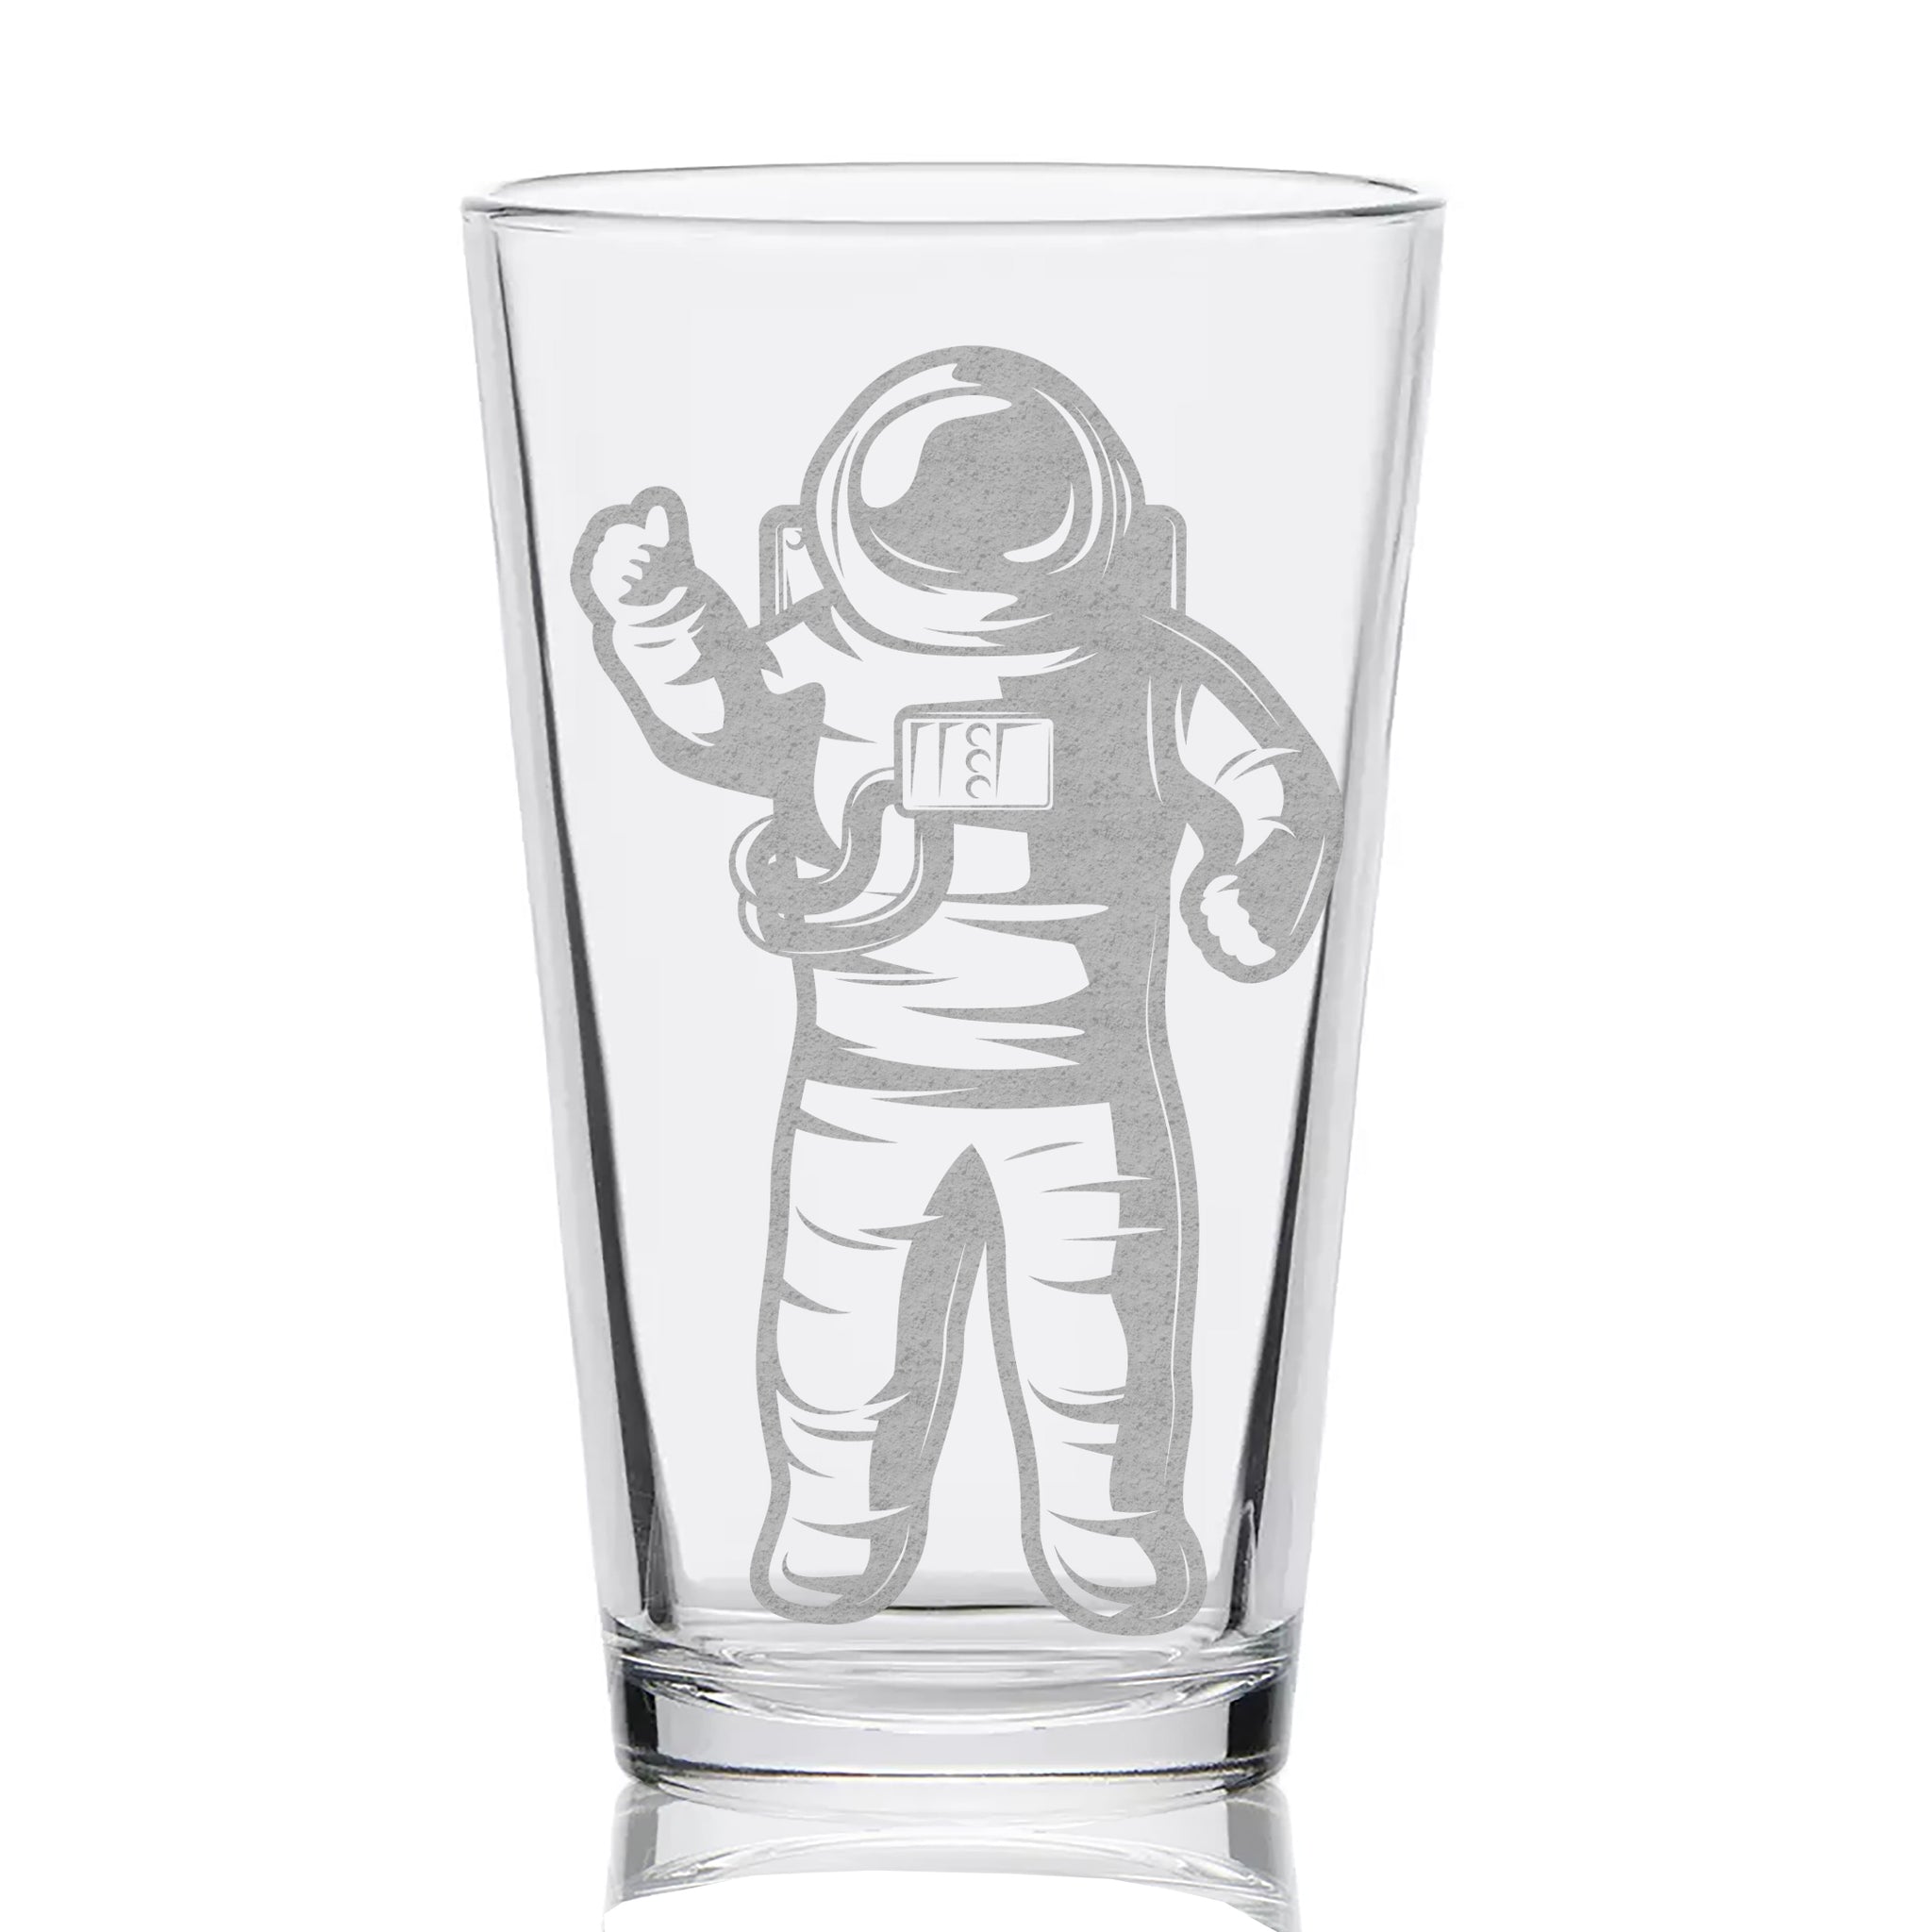 SPACE Pint Glasses